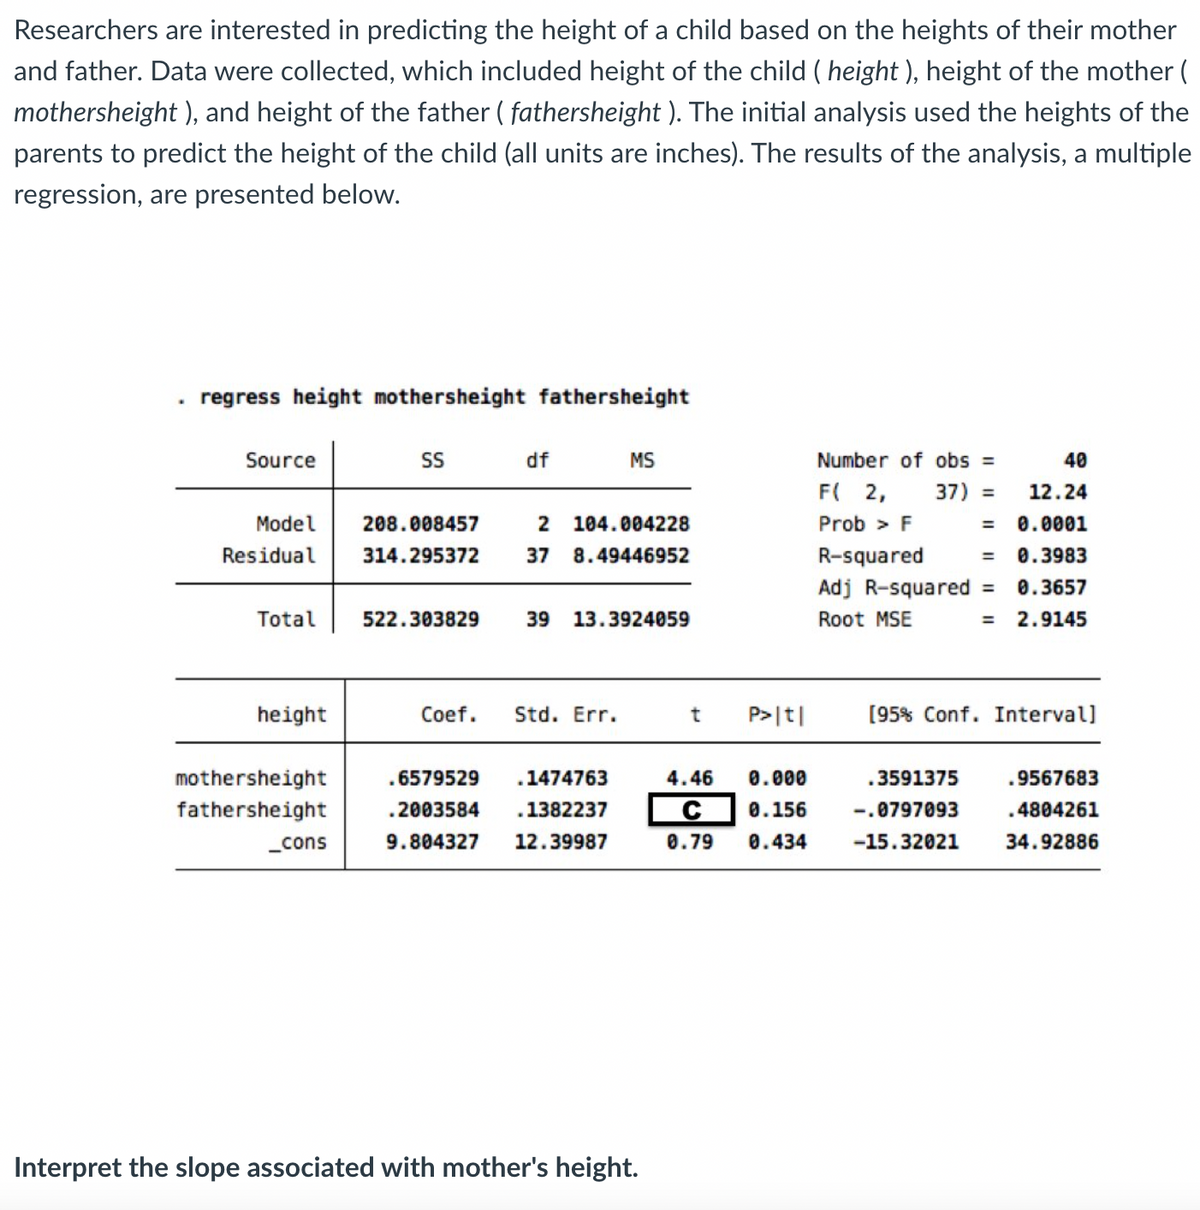 Researchers are interested in predicting the height of a child based on the heights of their mother
and father. Data were collected, which included height of the child (height ), height of the mother (
mothersheight), and height of the father (fathersheight ). The initial analysis used the heights of the
parents to predict the height of the child (all units are inches). The results of the analysis, a multiple
regression, are presented below.
.
regress height mothersheight fathersheight
Source
Model
Residual
Total
height
mothersheight
fathersheight
_cons
SS
208.008457
314.295372
522.303829
df
104.004228
2
37 8.49446952
MS
39 13.3924059
Coef. Std. Err.
.6579529 .1474763
.2003584 .1382237
9.804327 12.39987
Interpret the slope associated with mother's height.
t P>|t|
4.46 0.000
с 0.156
0.79 0.434
Number of obs =
F( 2,
37) =
Prob > F
R-squared
Adj R-squared =
Root MSE
=
=
.3591375
-.0797093
-15.32021
=
40
12.24
0.0001
0.3983
0.3657
2.9145
[95% Conf. Intervall
9567683
.4804261
34.92886